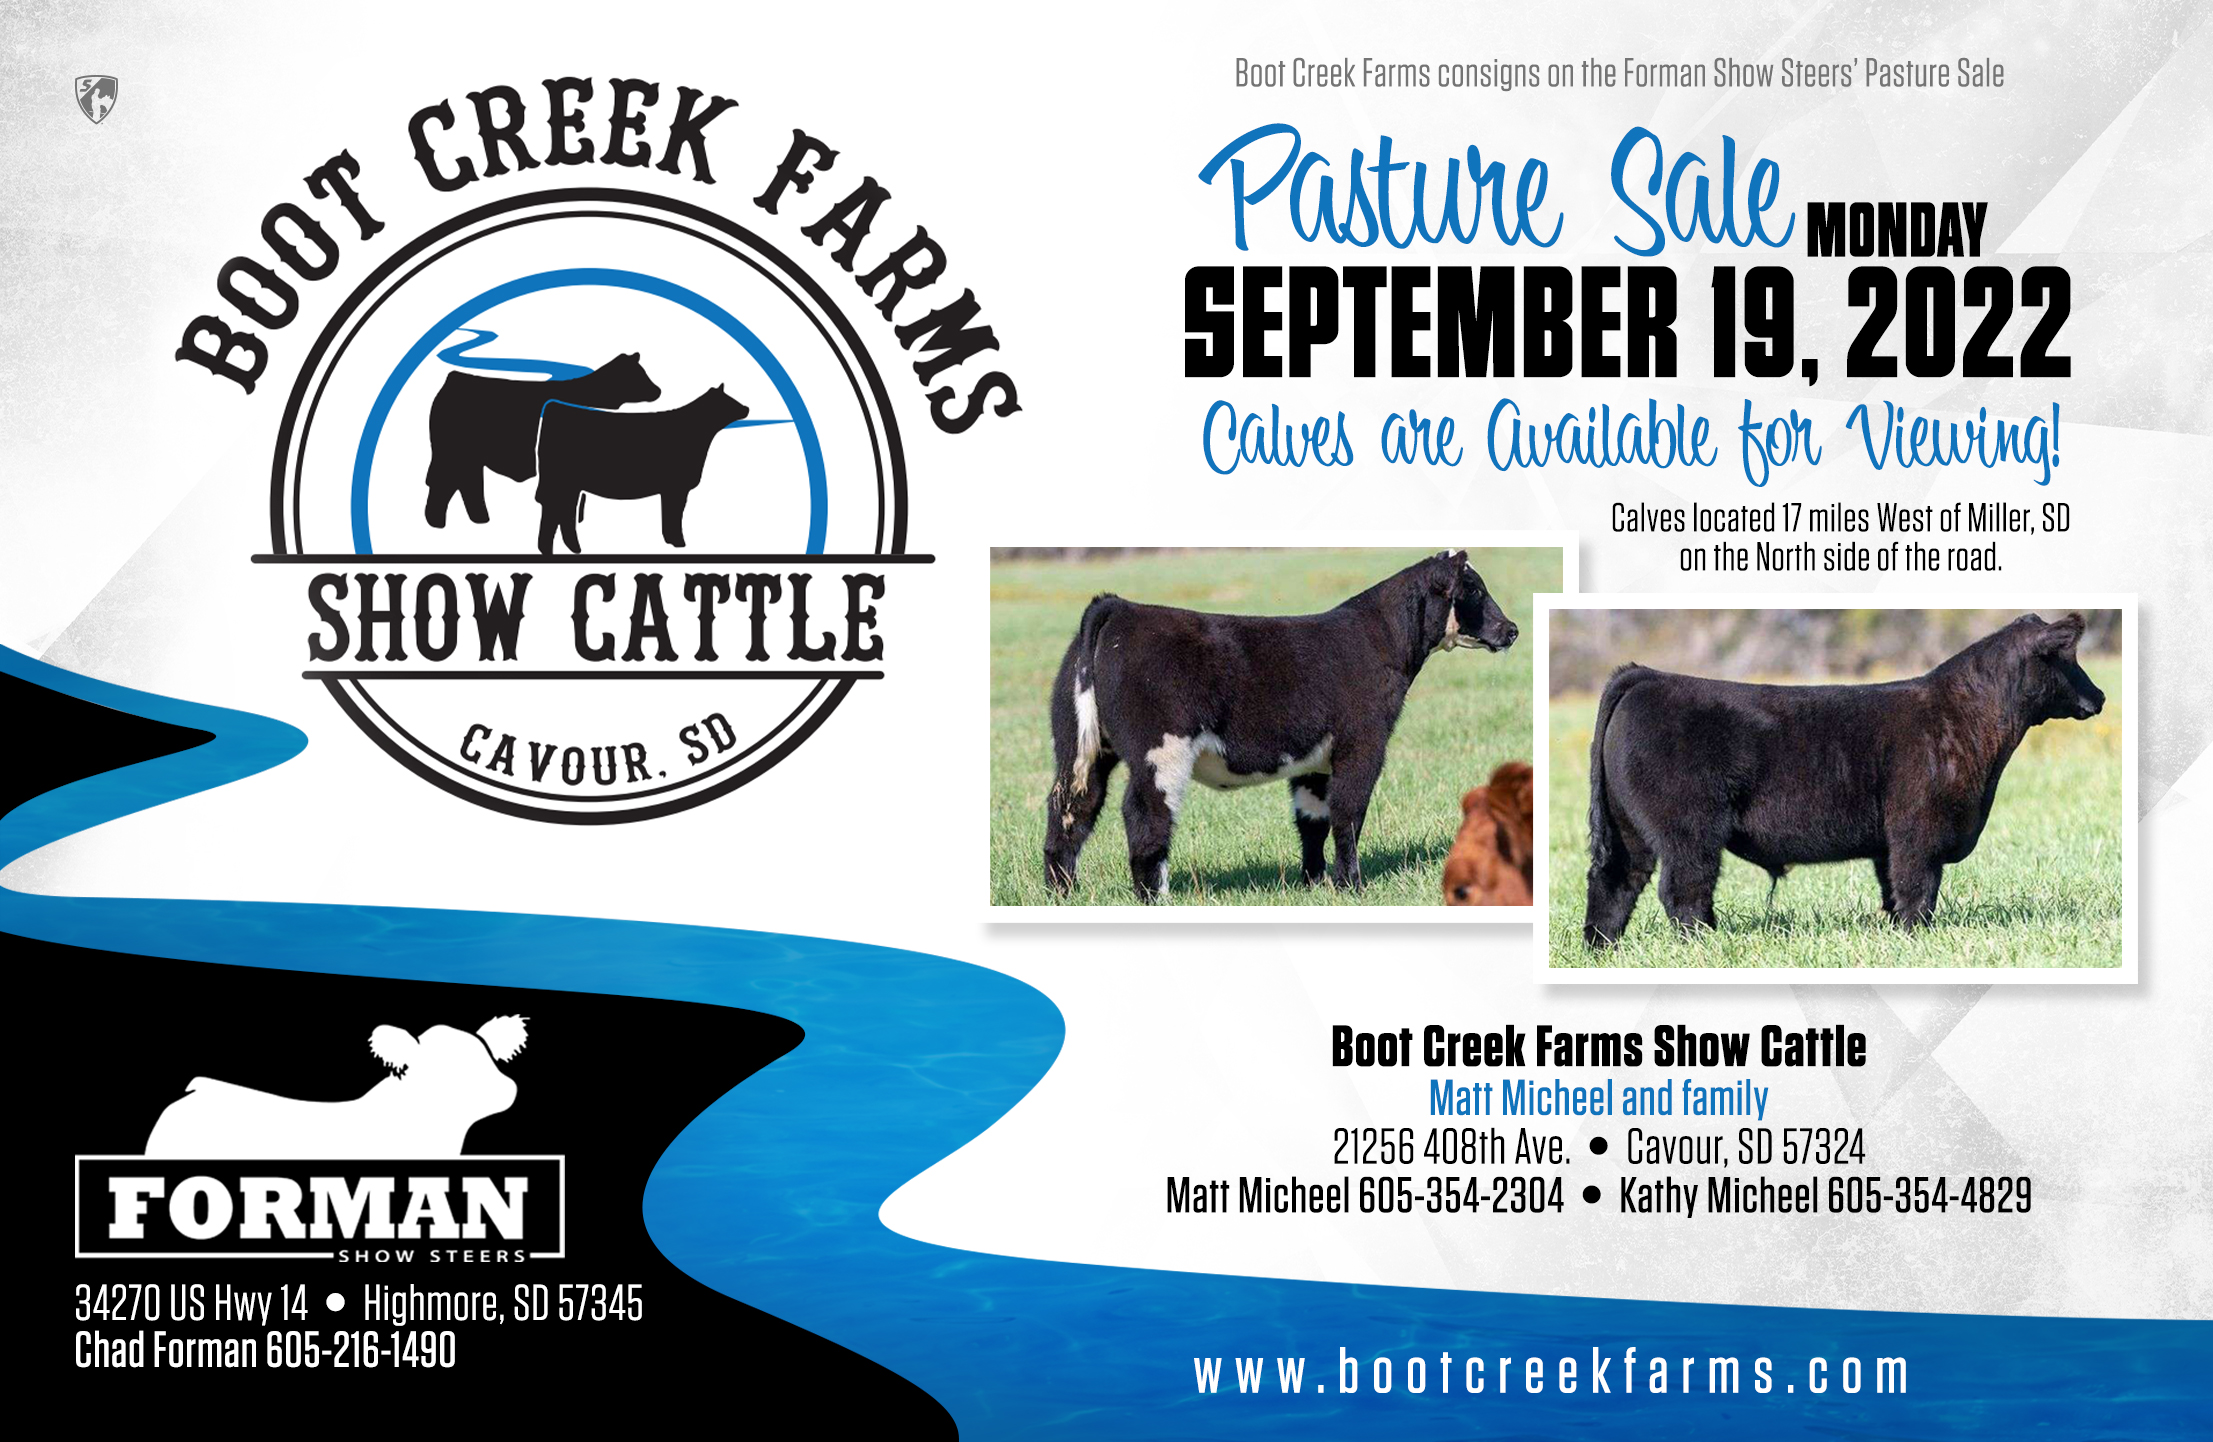 2021 Forman Show Steers and Boot Creek Farms Pasture Sale